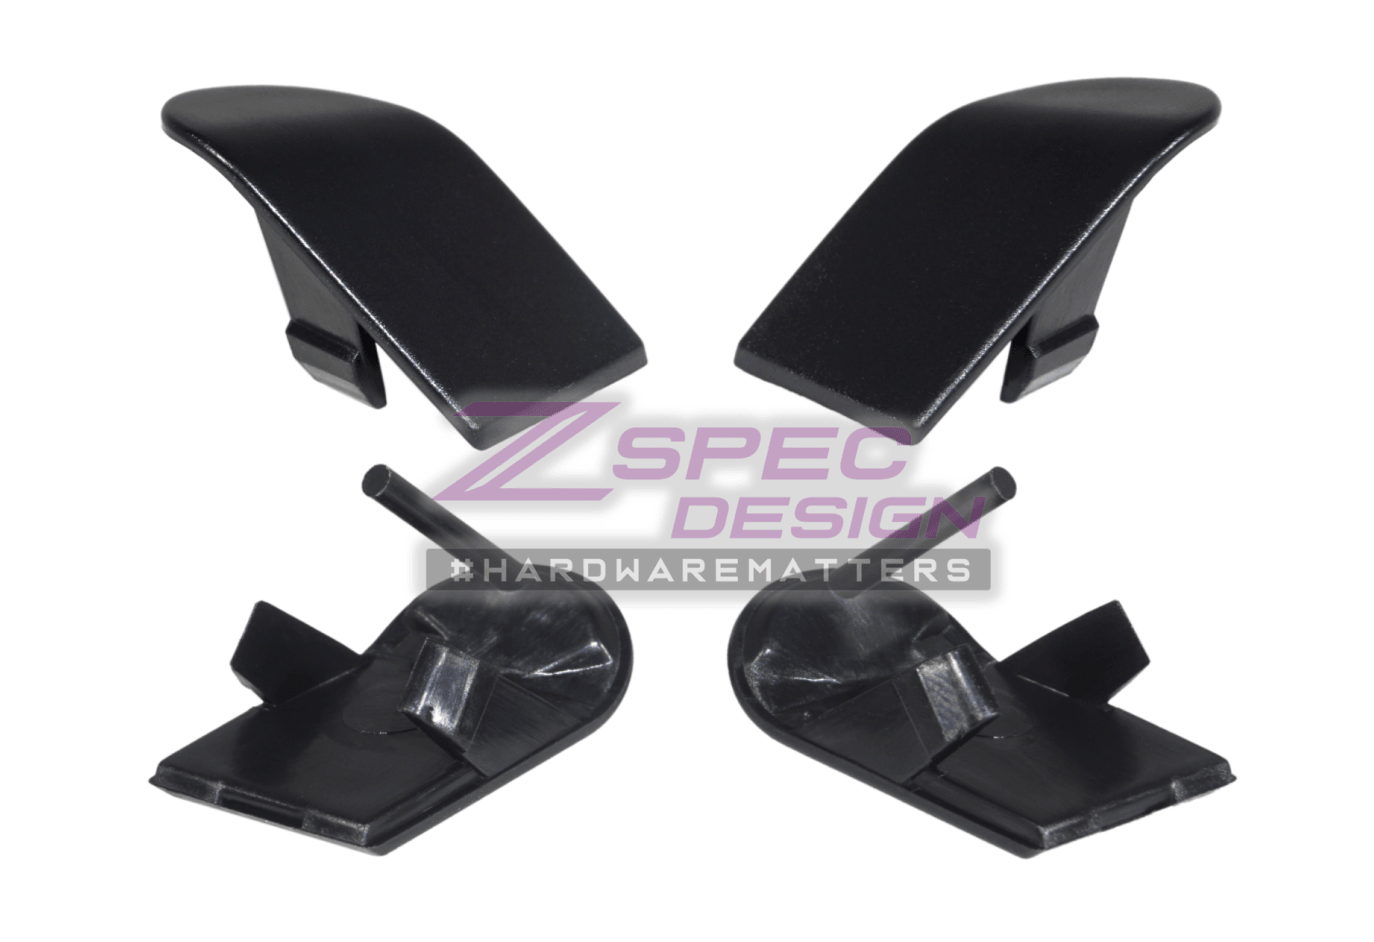 ZSPEC LHD Radio Bezel Top Screw Cover for '90-96 Nissan 300ZX, Left/Right Pair Single DIN Double DIN Dress Up Bolts Hardware 1990 1991 1992 1993 1994 1995 1996